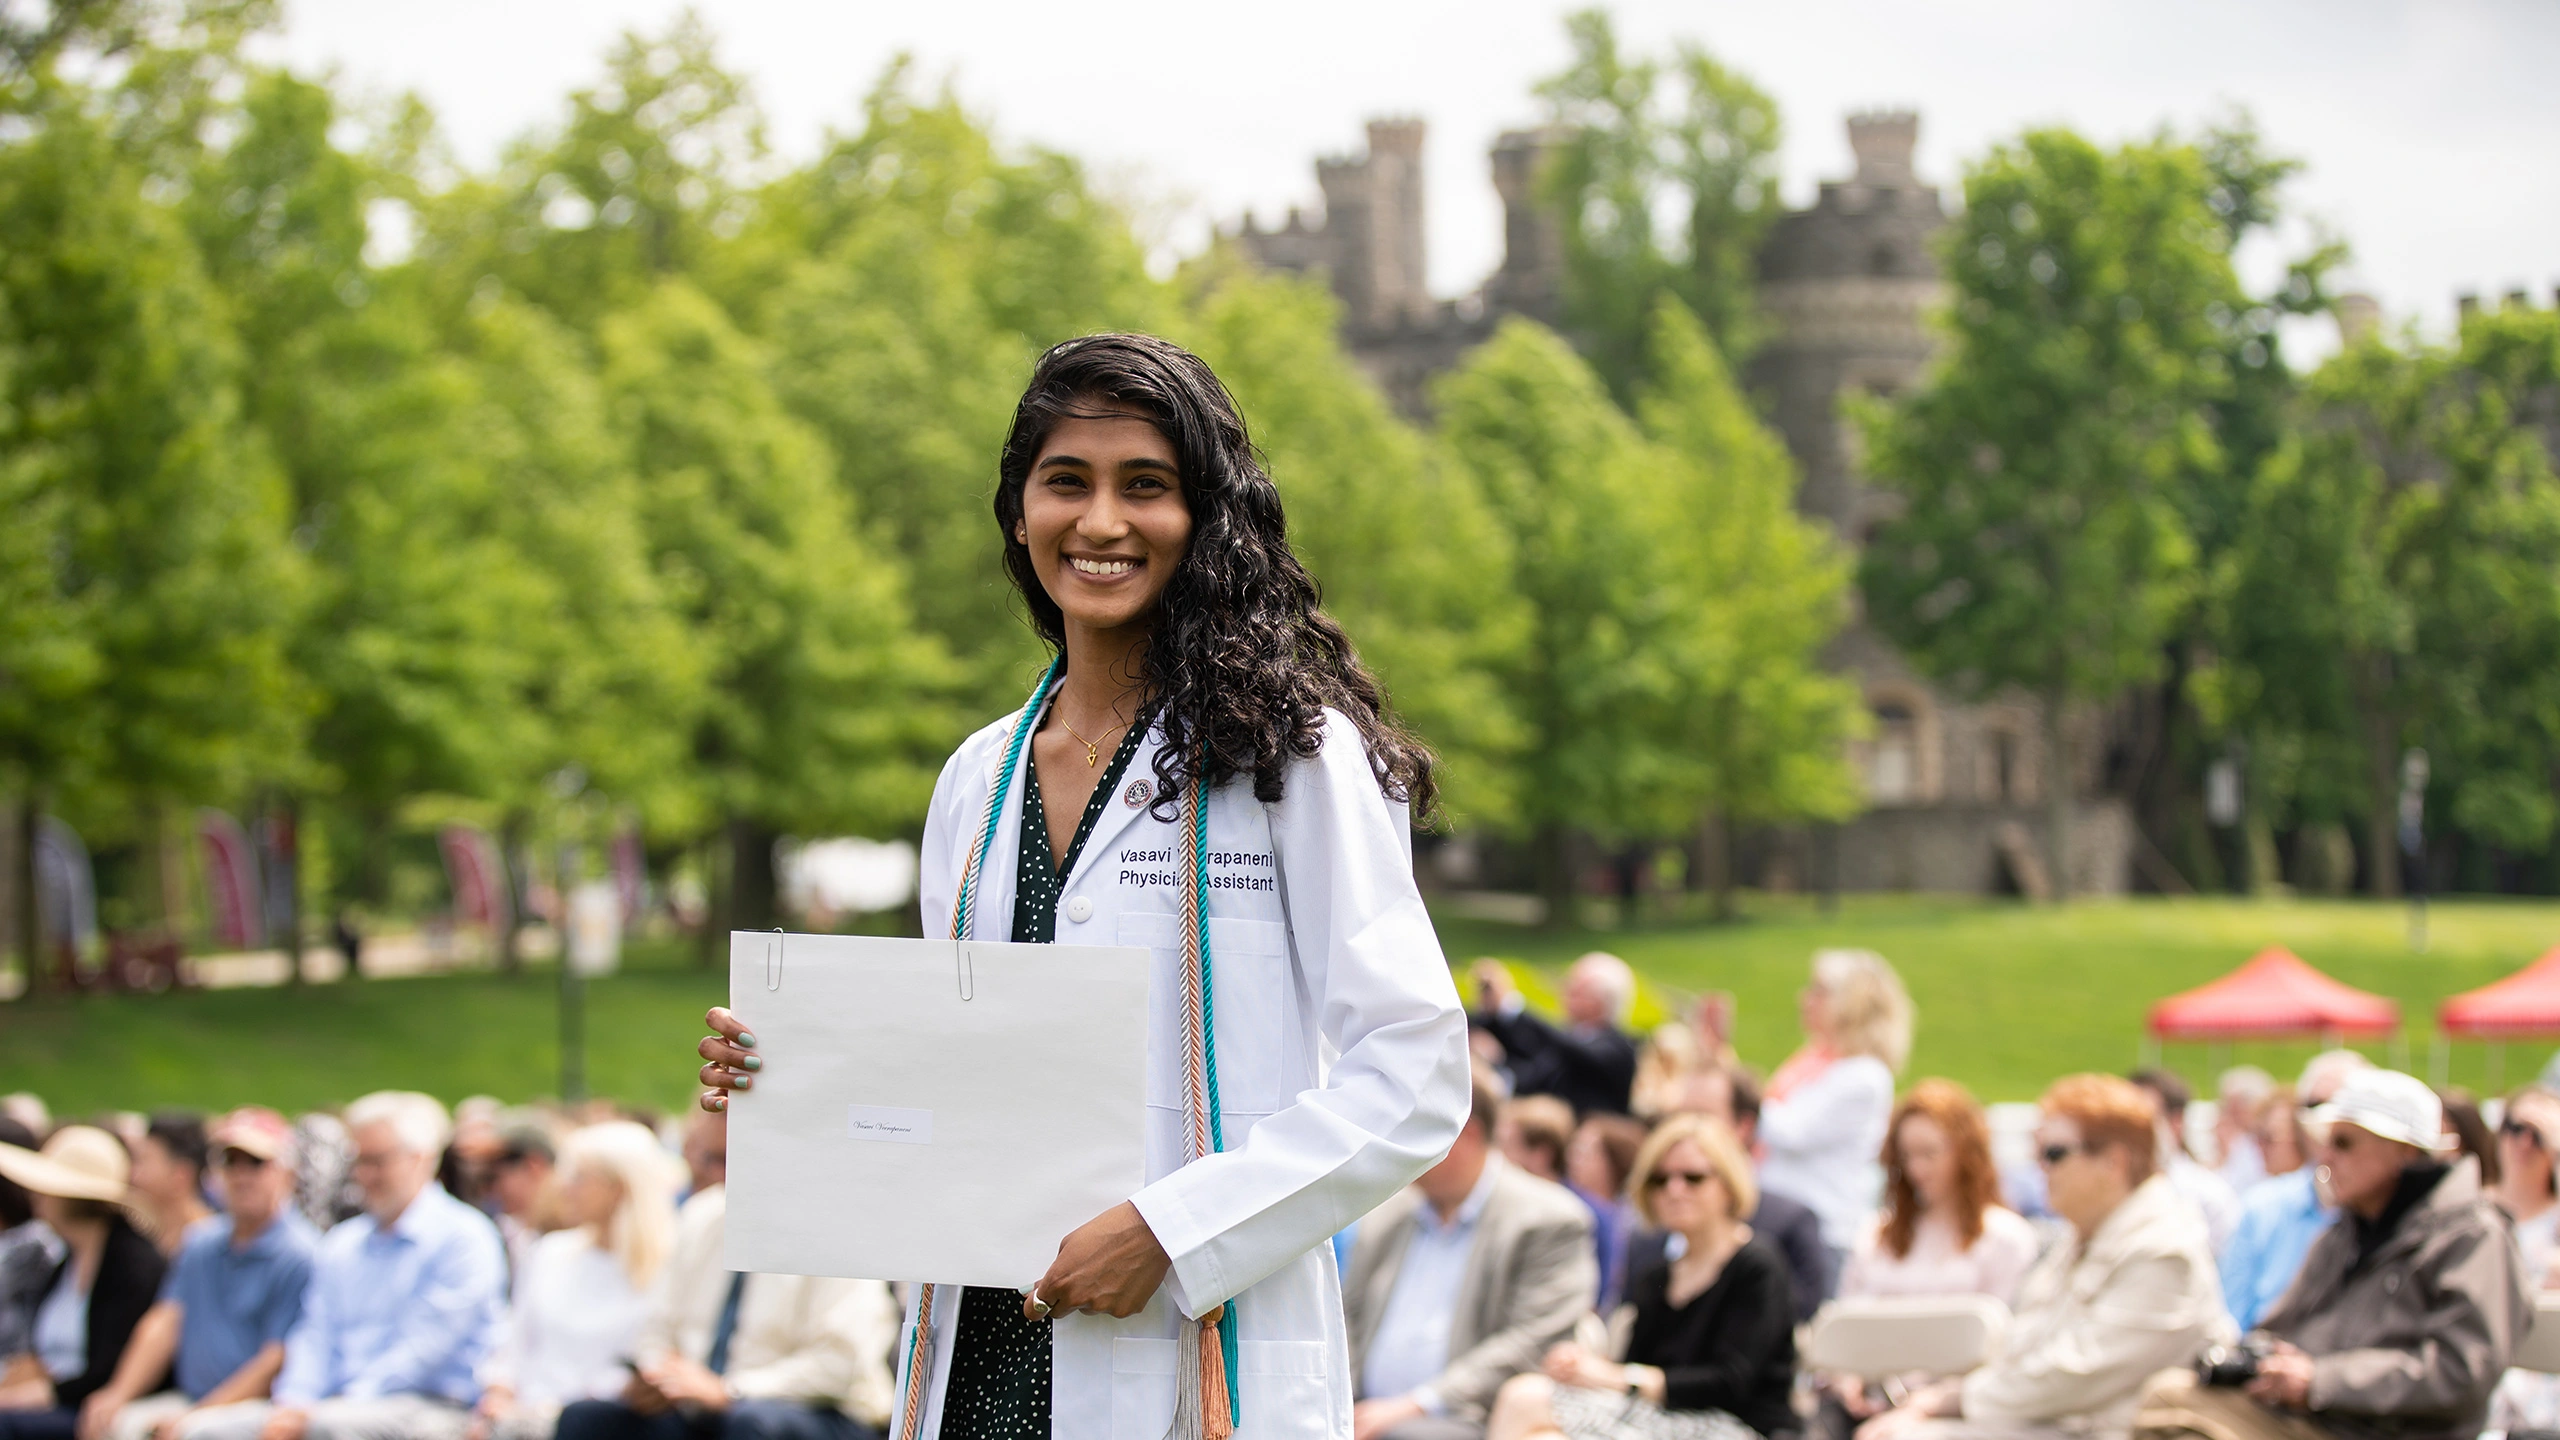 A PA student holds her diploma and smiles during the white coat commencement ceremony.